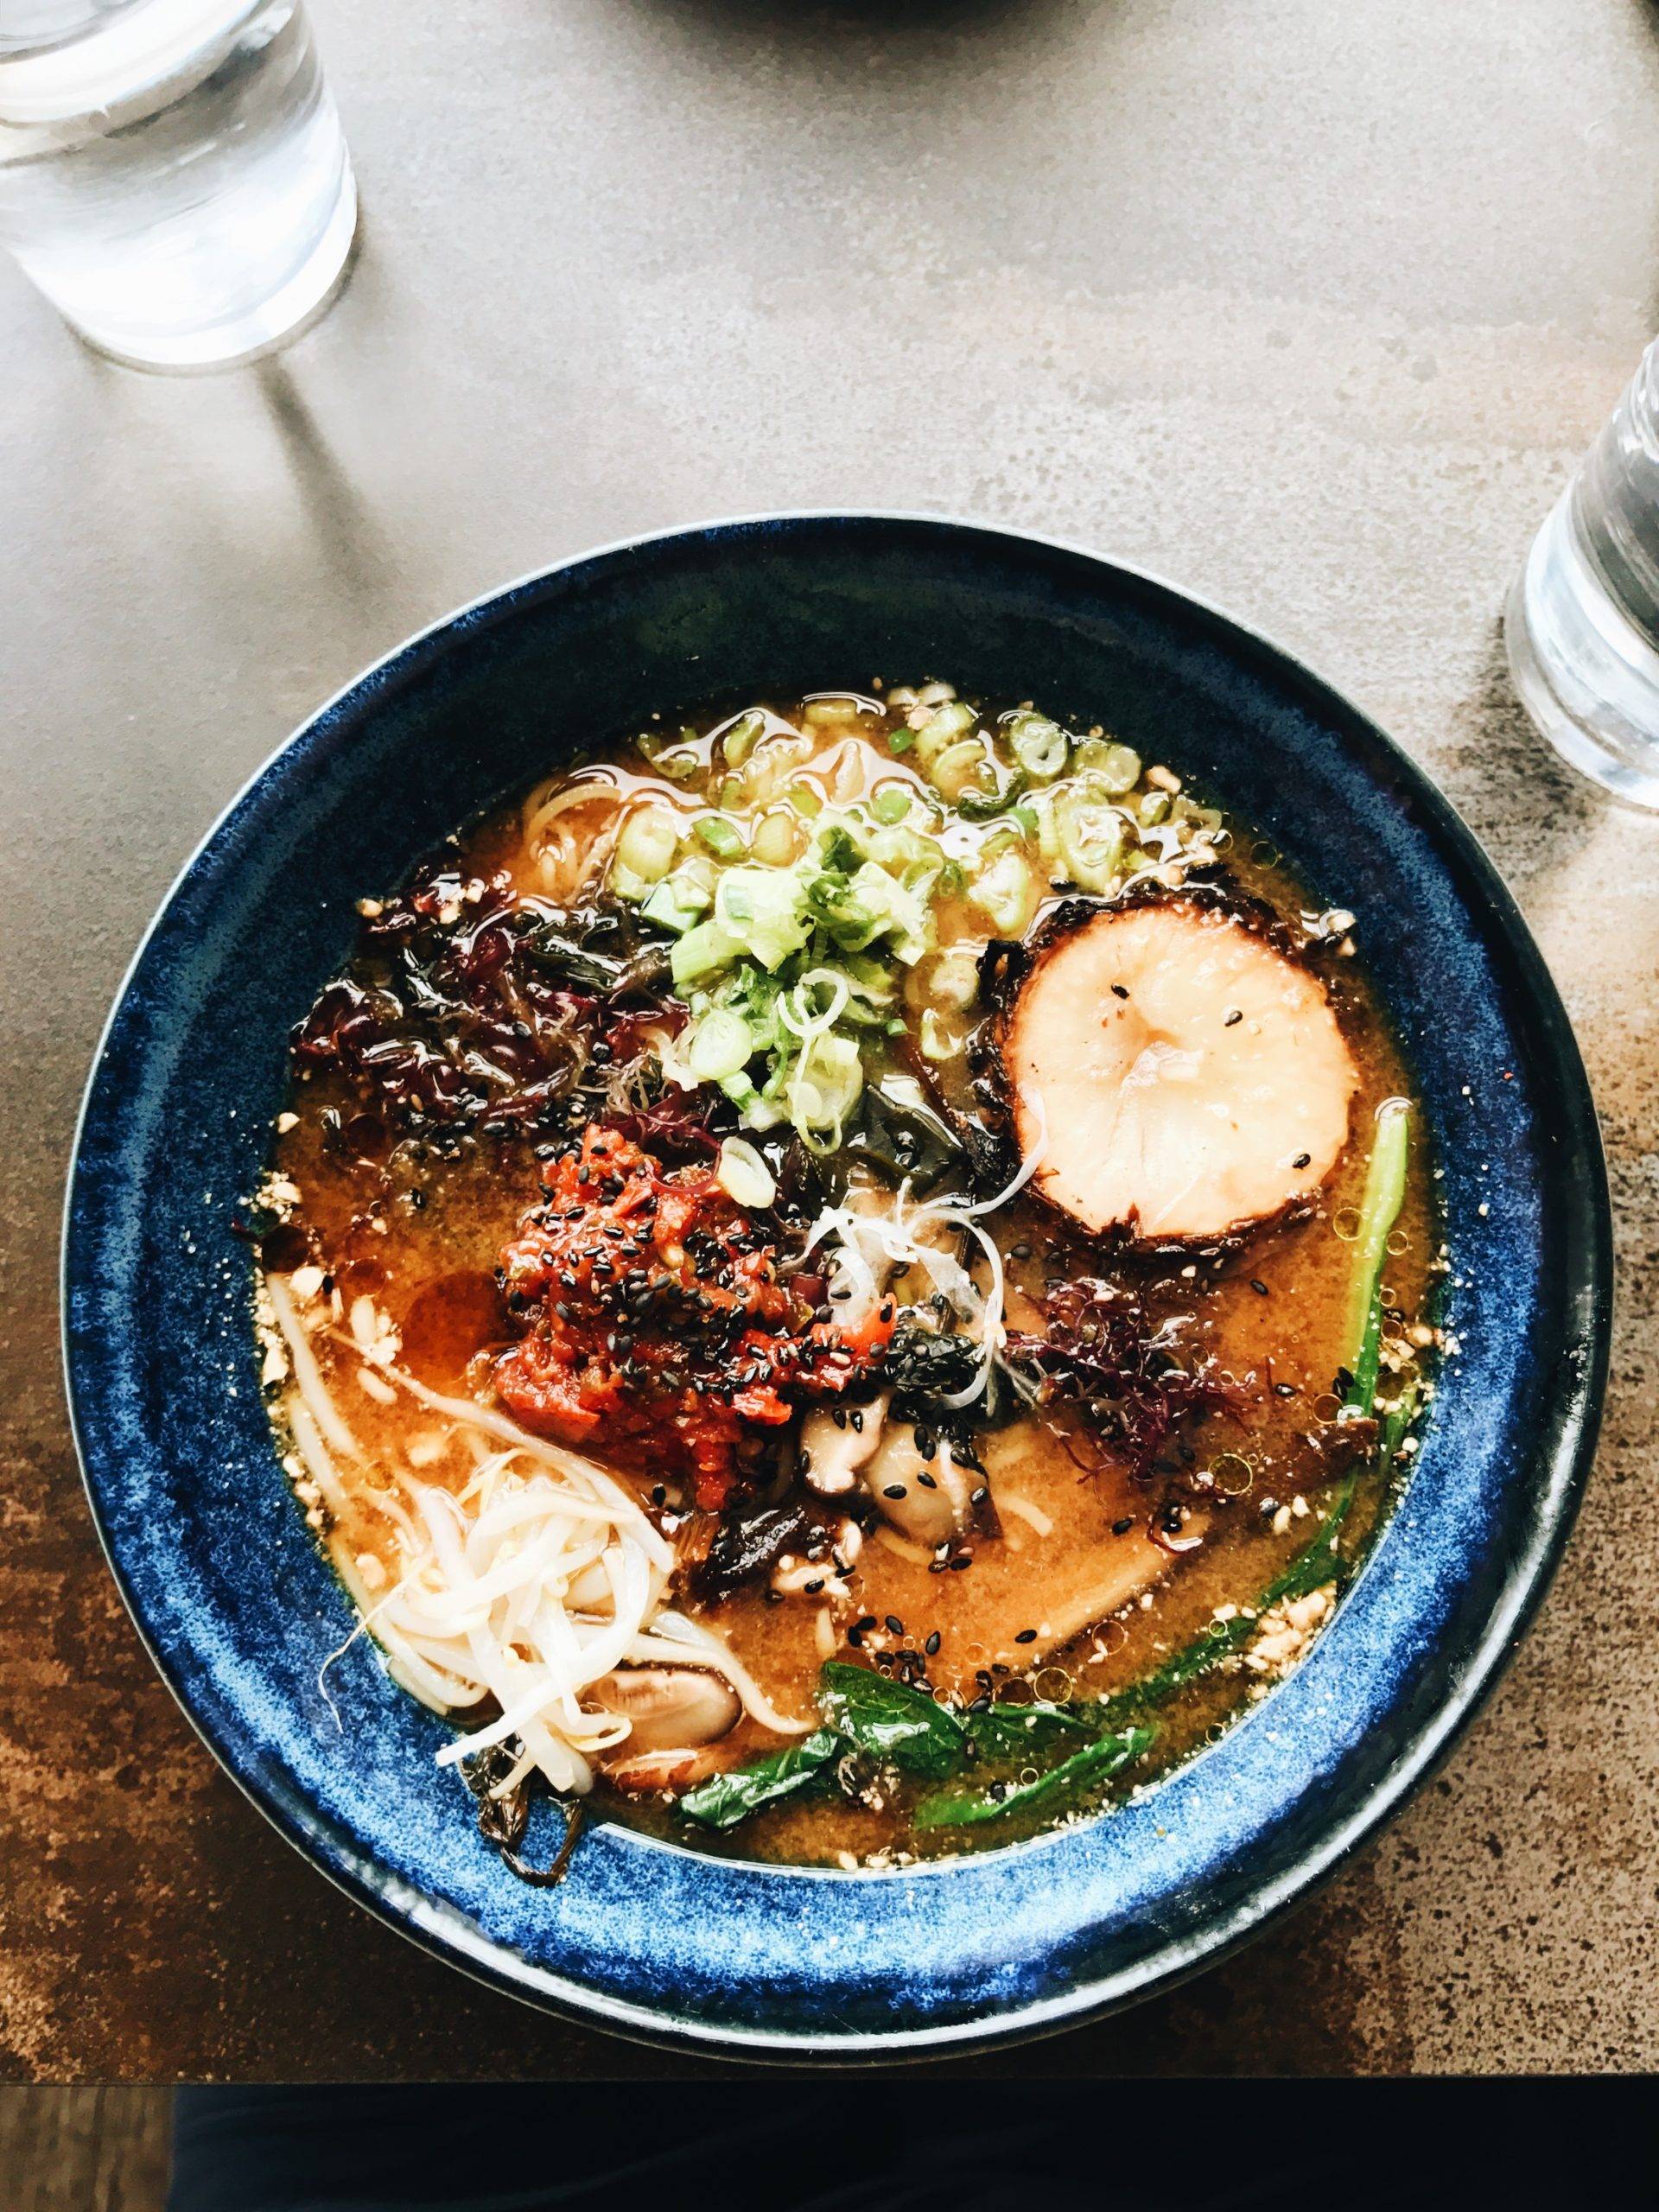 A warm bowl of ramen with tons of goodies on top.